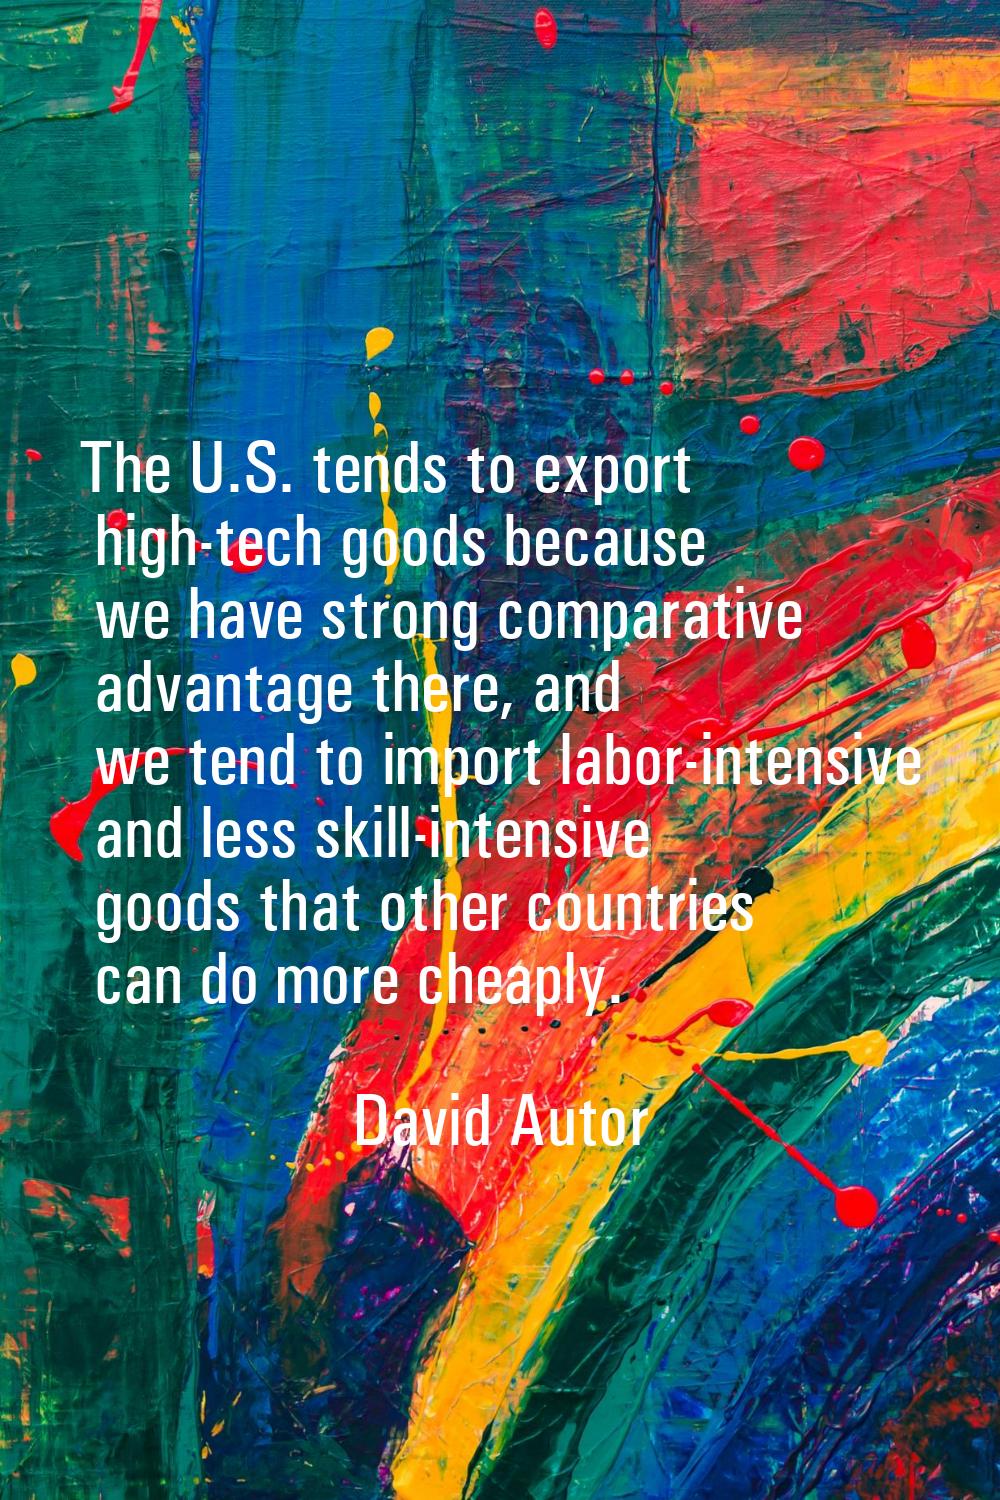 The U.S. tends to export high-tech goods because we have strong comparative advantage there, and we